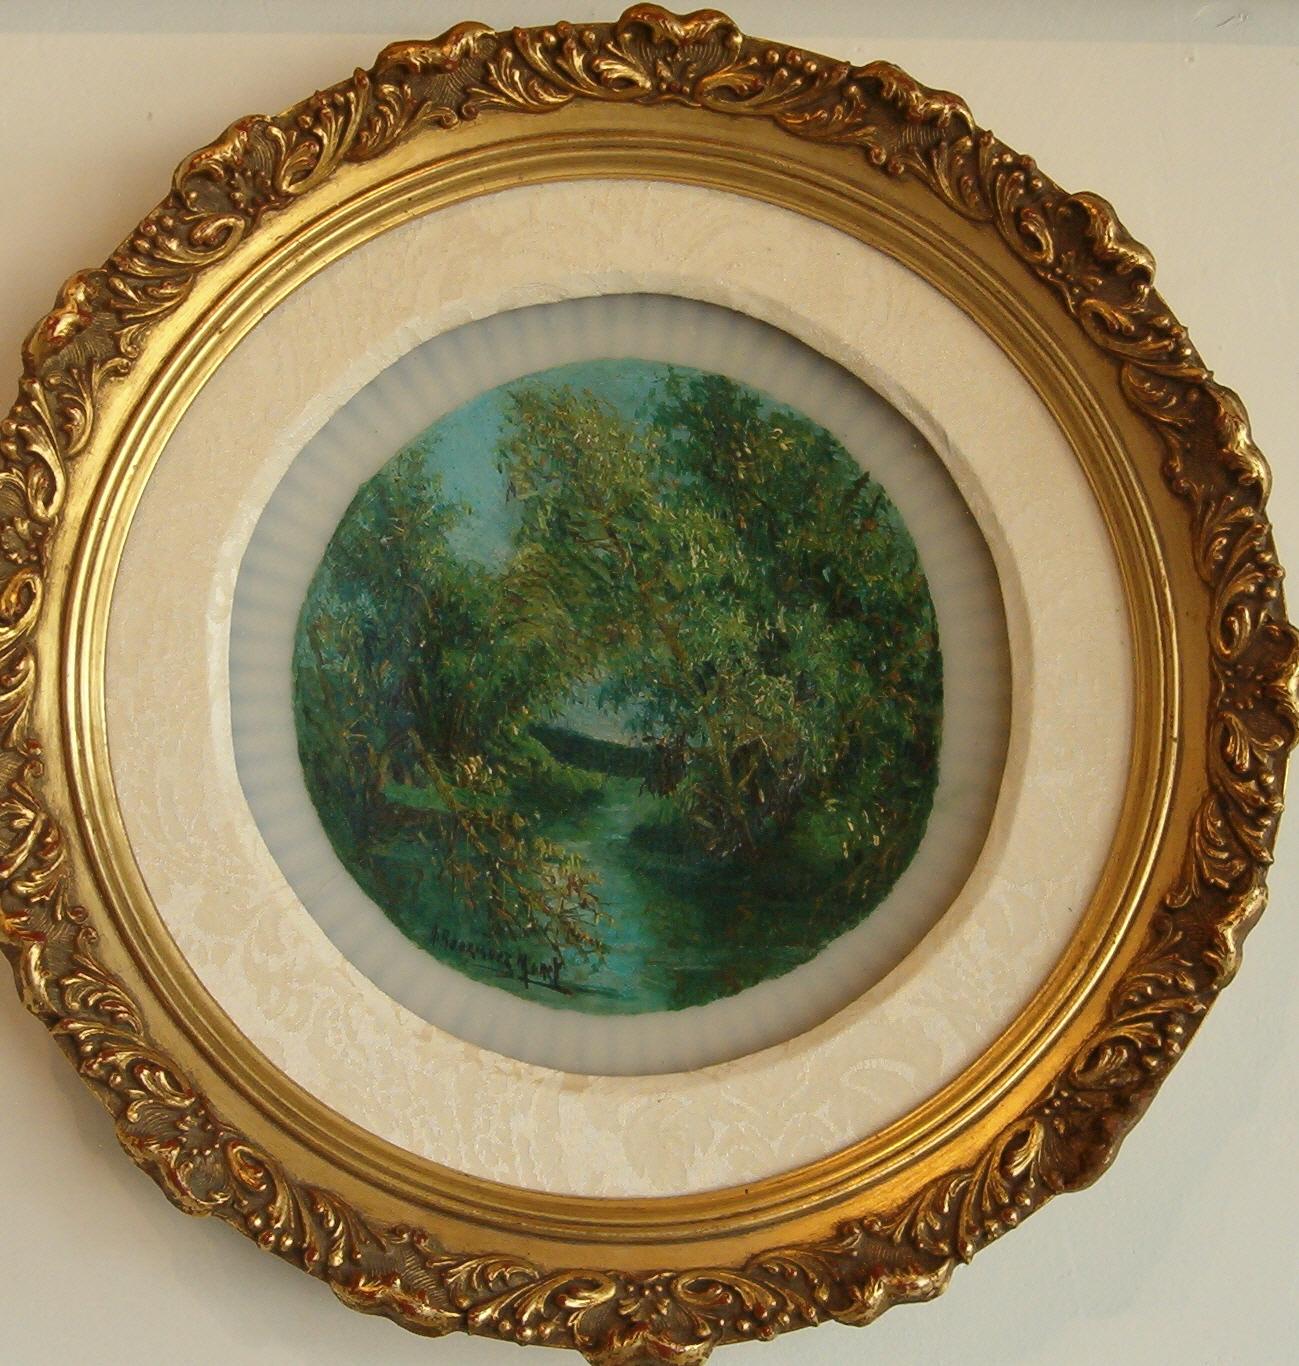 Antonio Rodriguez Morey
Paisaje con Rio
Oil on  a plate
8,5 in 
framed 15 in

Frame included

Antonio Rodriguez Morey (1874- 1967) was born in Havana on March 4, 1874. He studied at the San Alejandro Academy where Valentín Sanz Carta, the celebrated